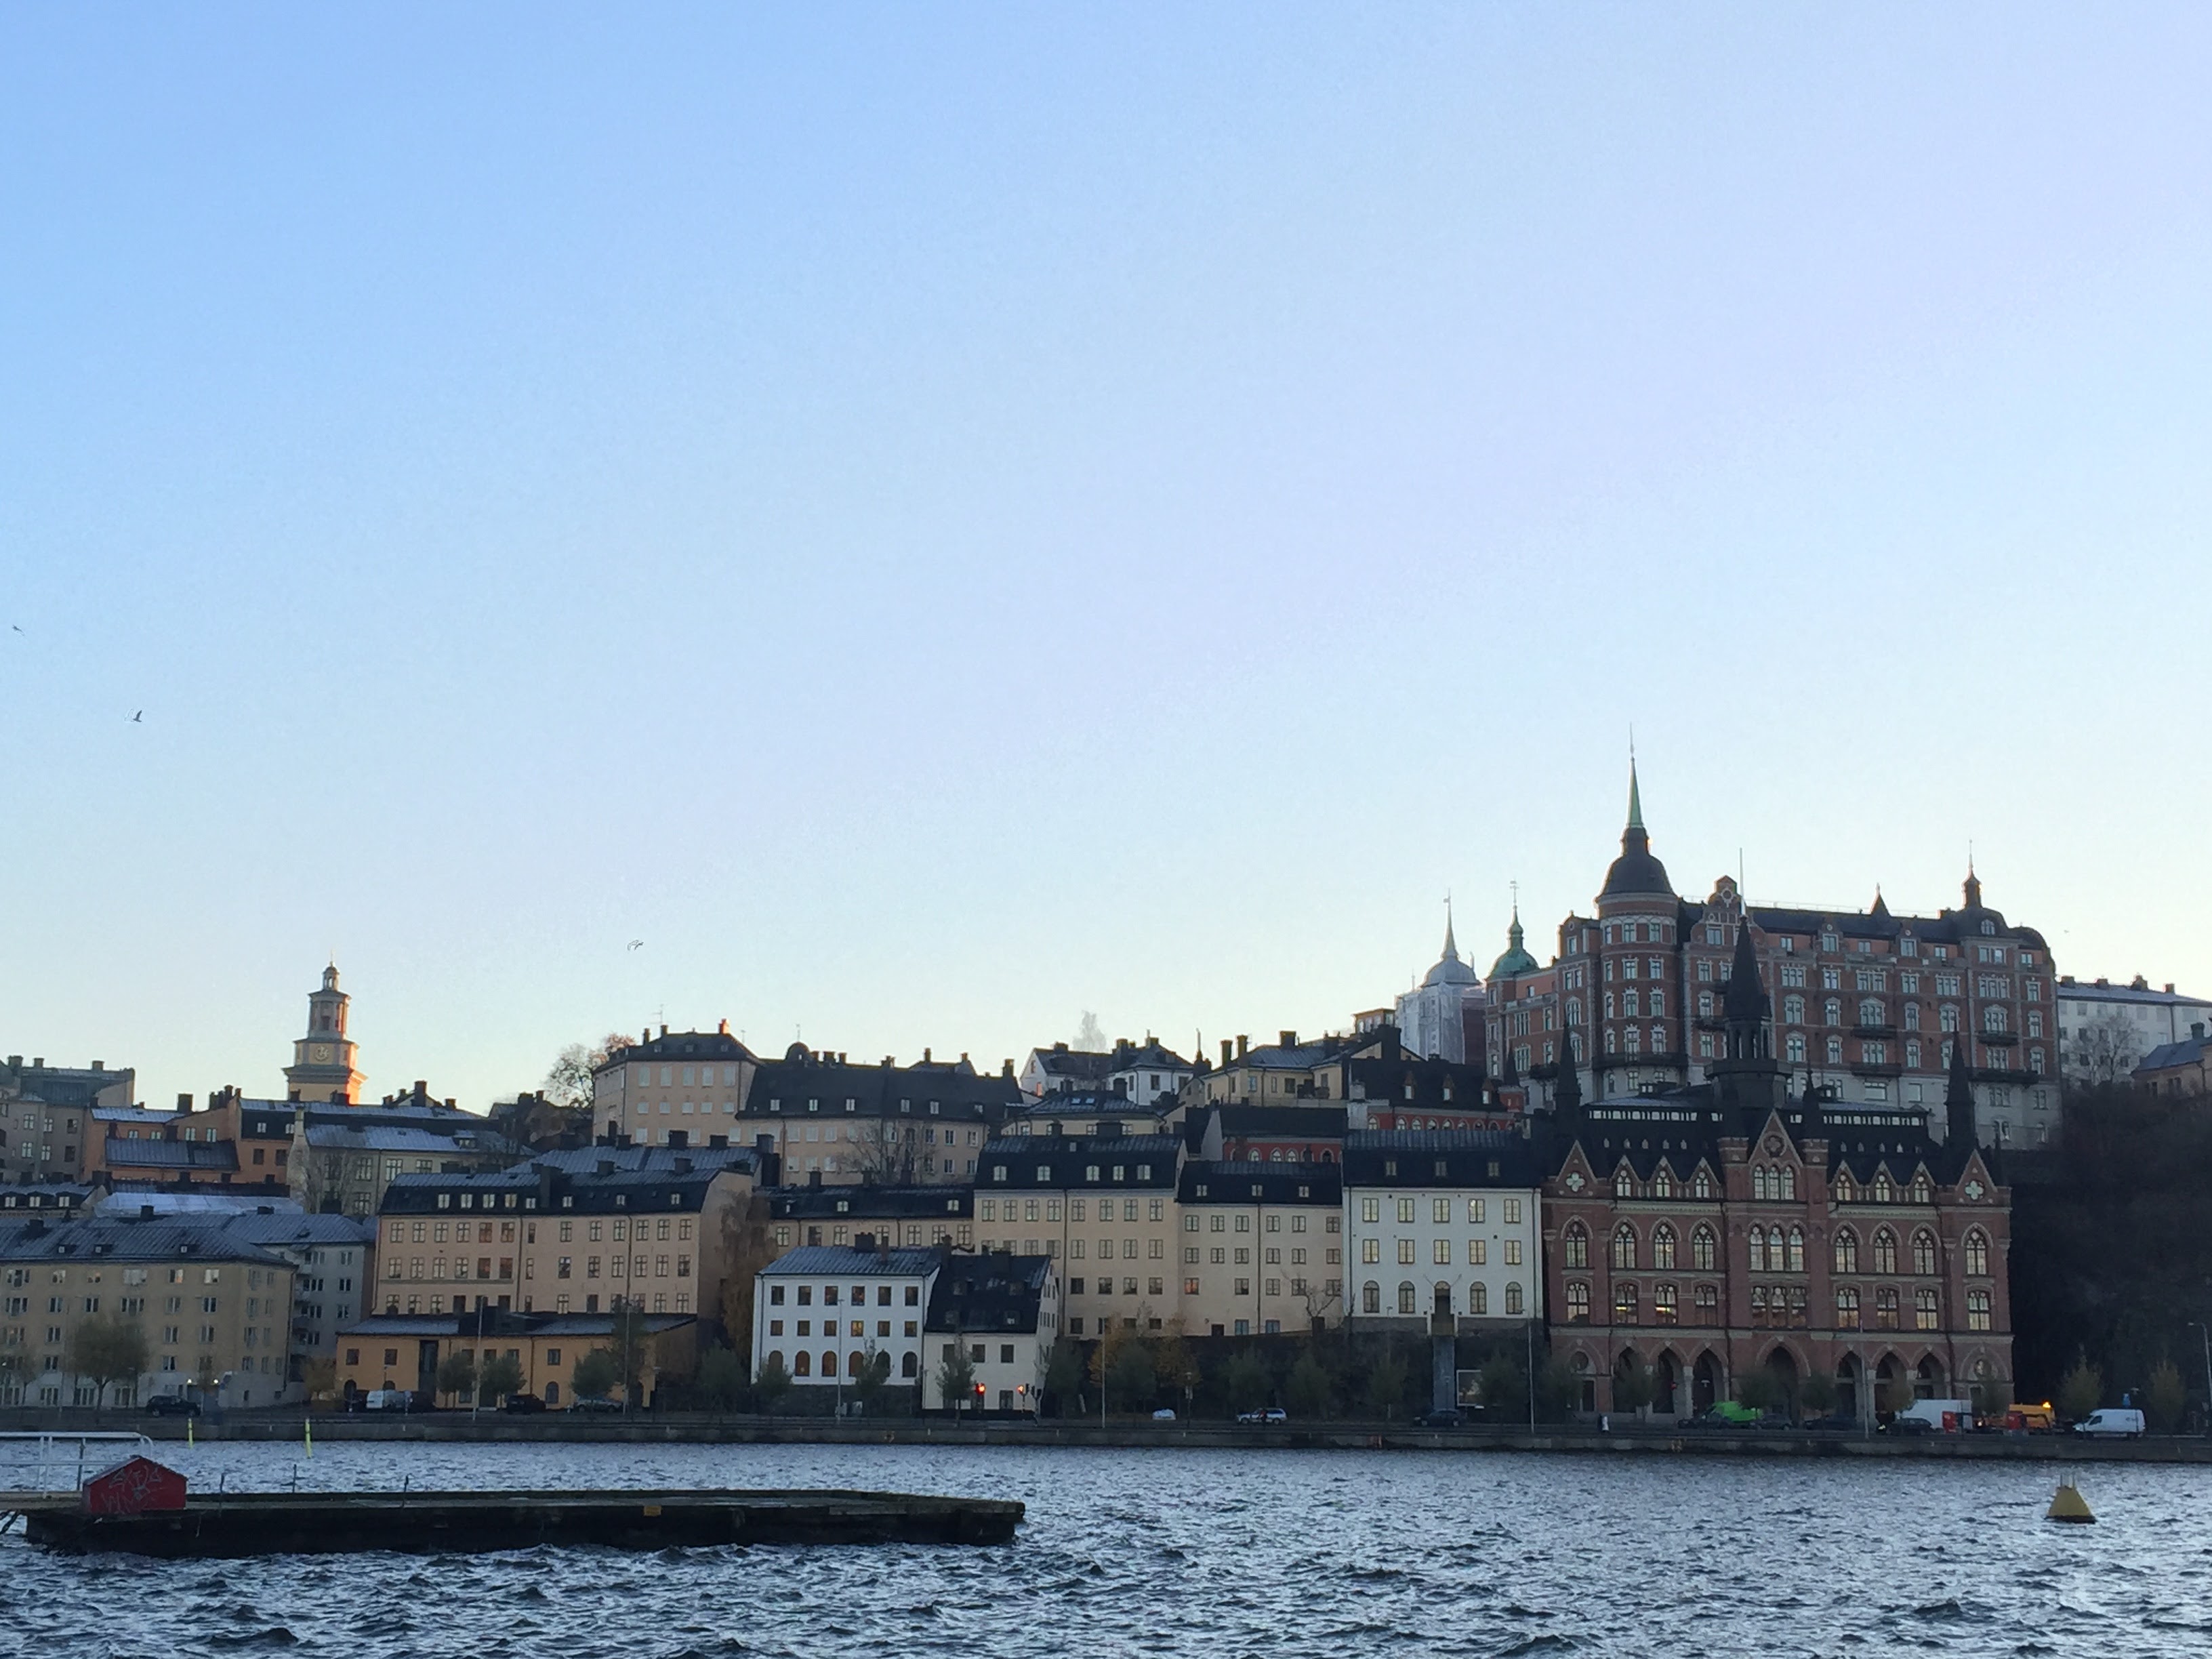 View of the skyline from Gamla Stan